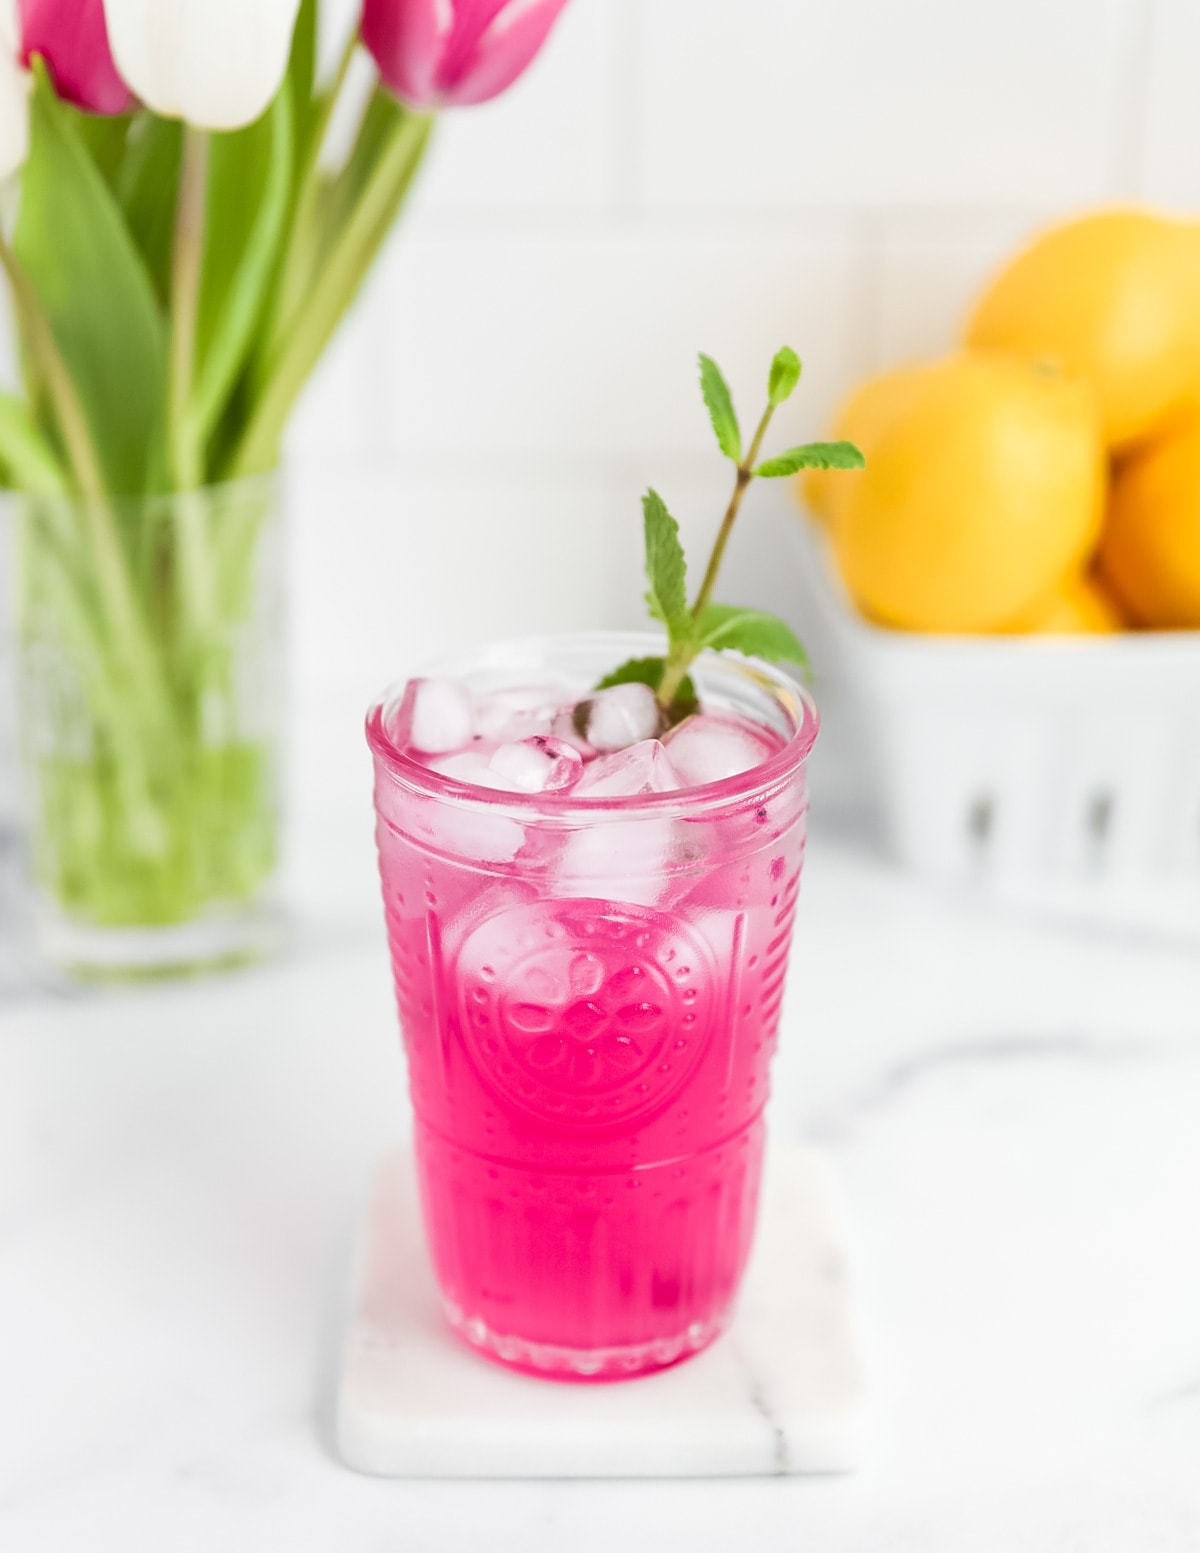 A clear glass filled with bright pink lemonade with ice and a sprig of fresh mint in it